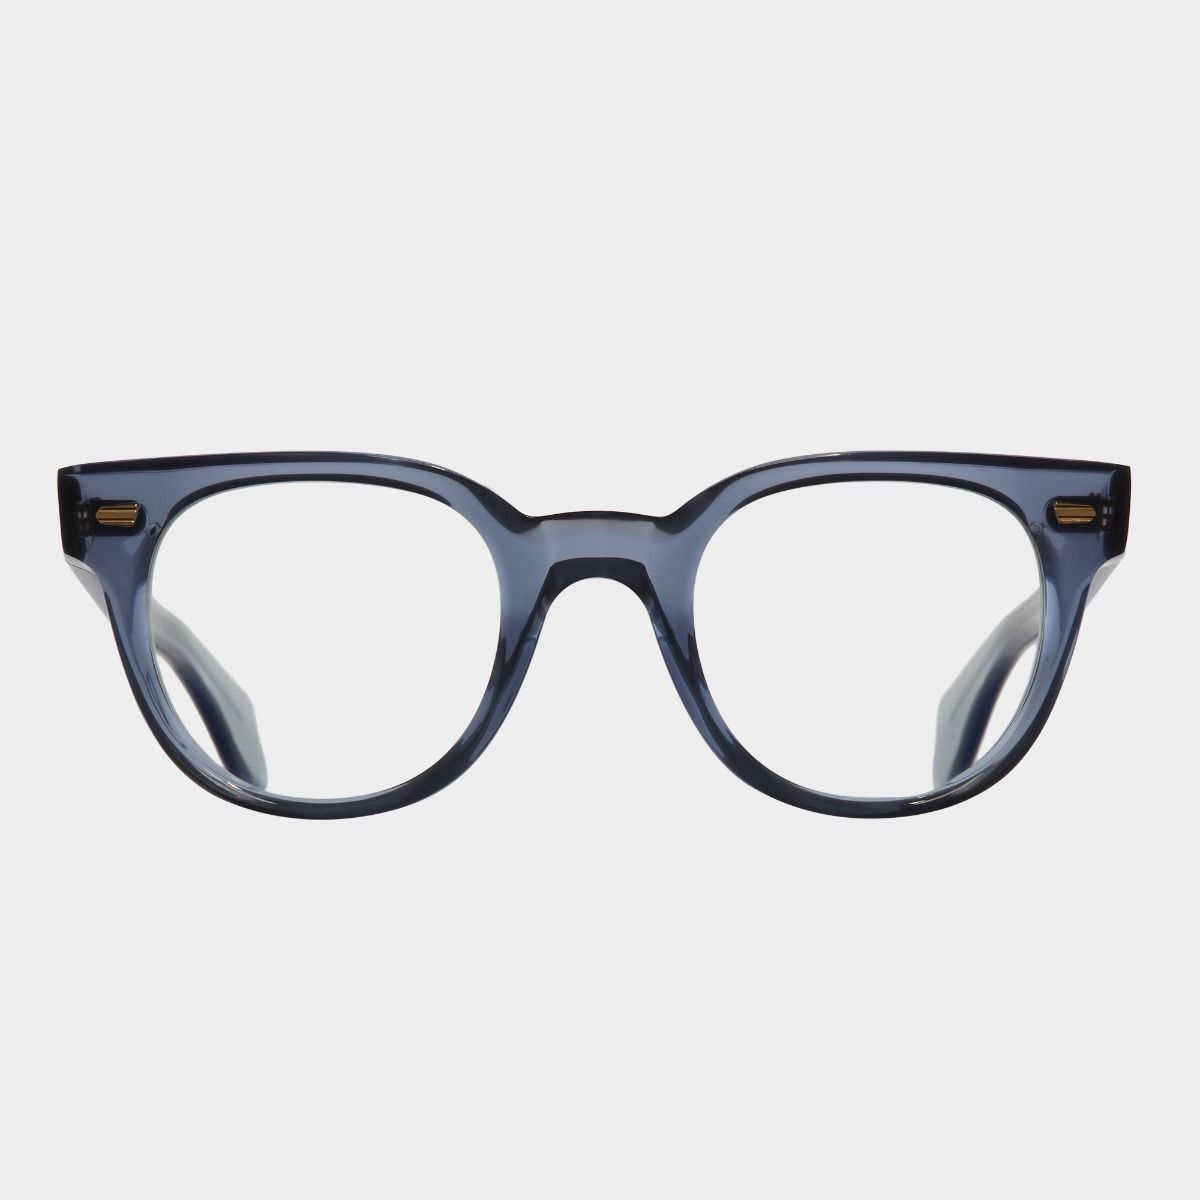 Cutler and Gross, 1392 Optical Round Glasses - Brooklyn Blue